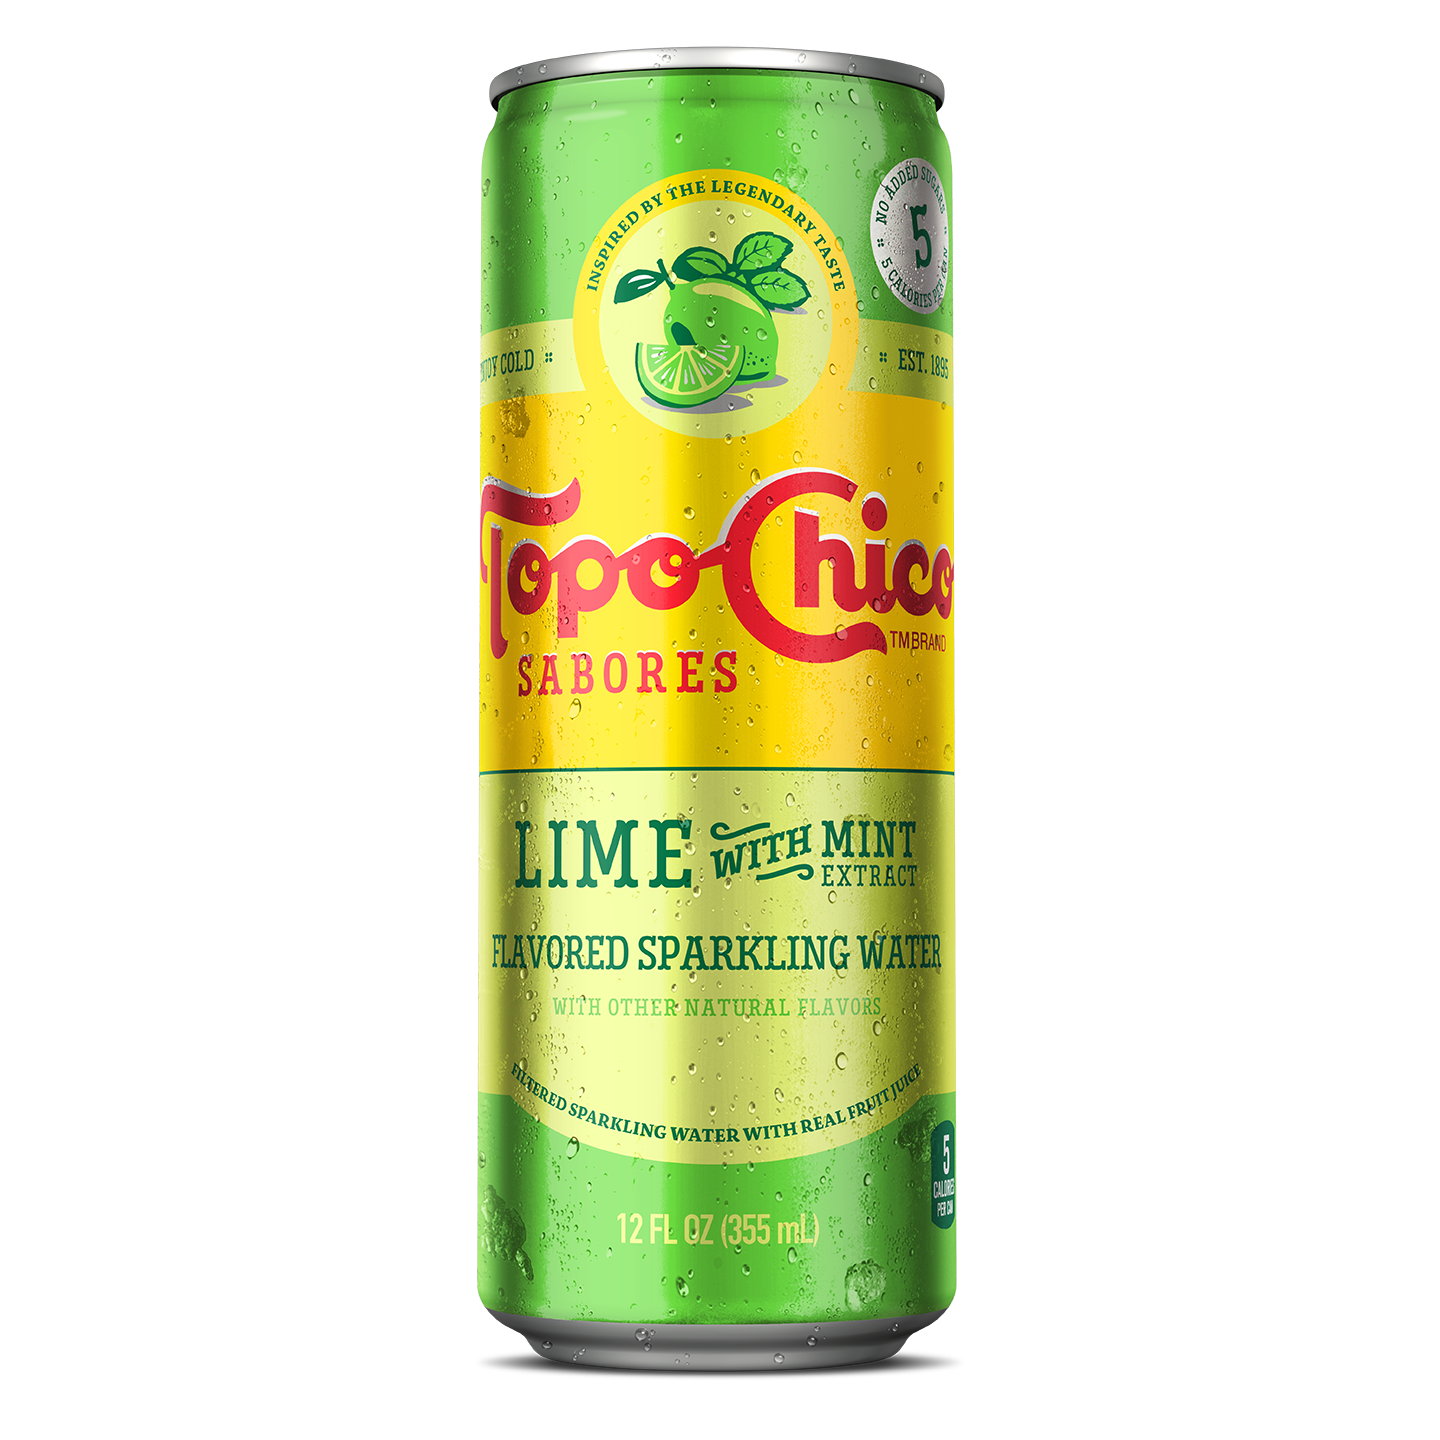 Topochico sabores lime with mint can 24ct 12oz